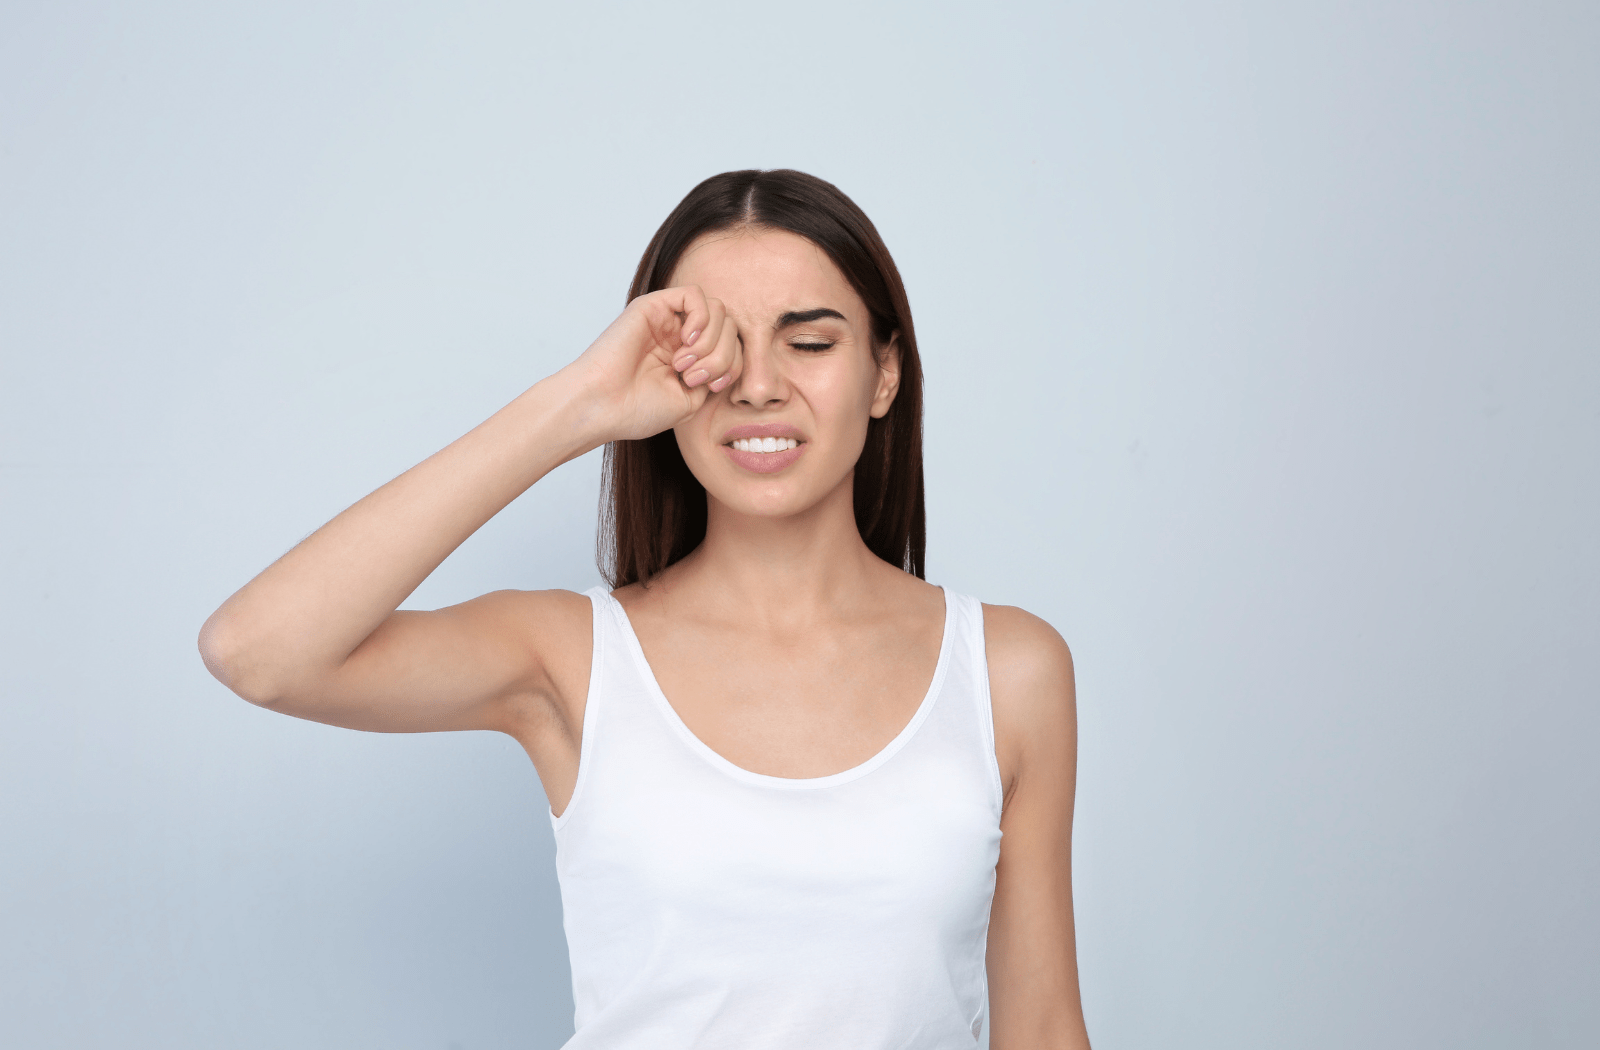 A woman rubbing her right eye with her right hand due to irritation